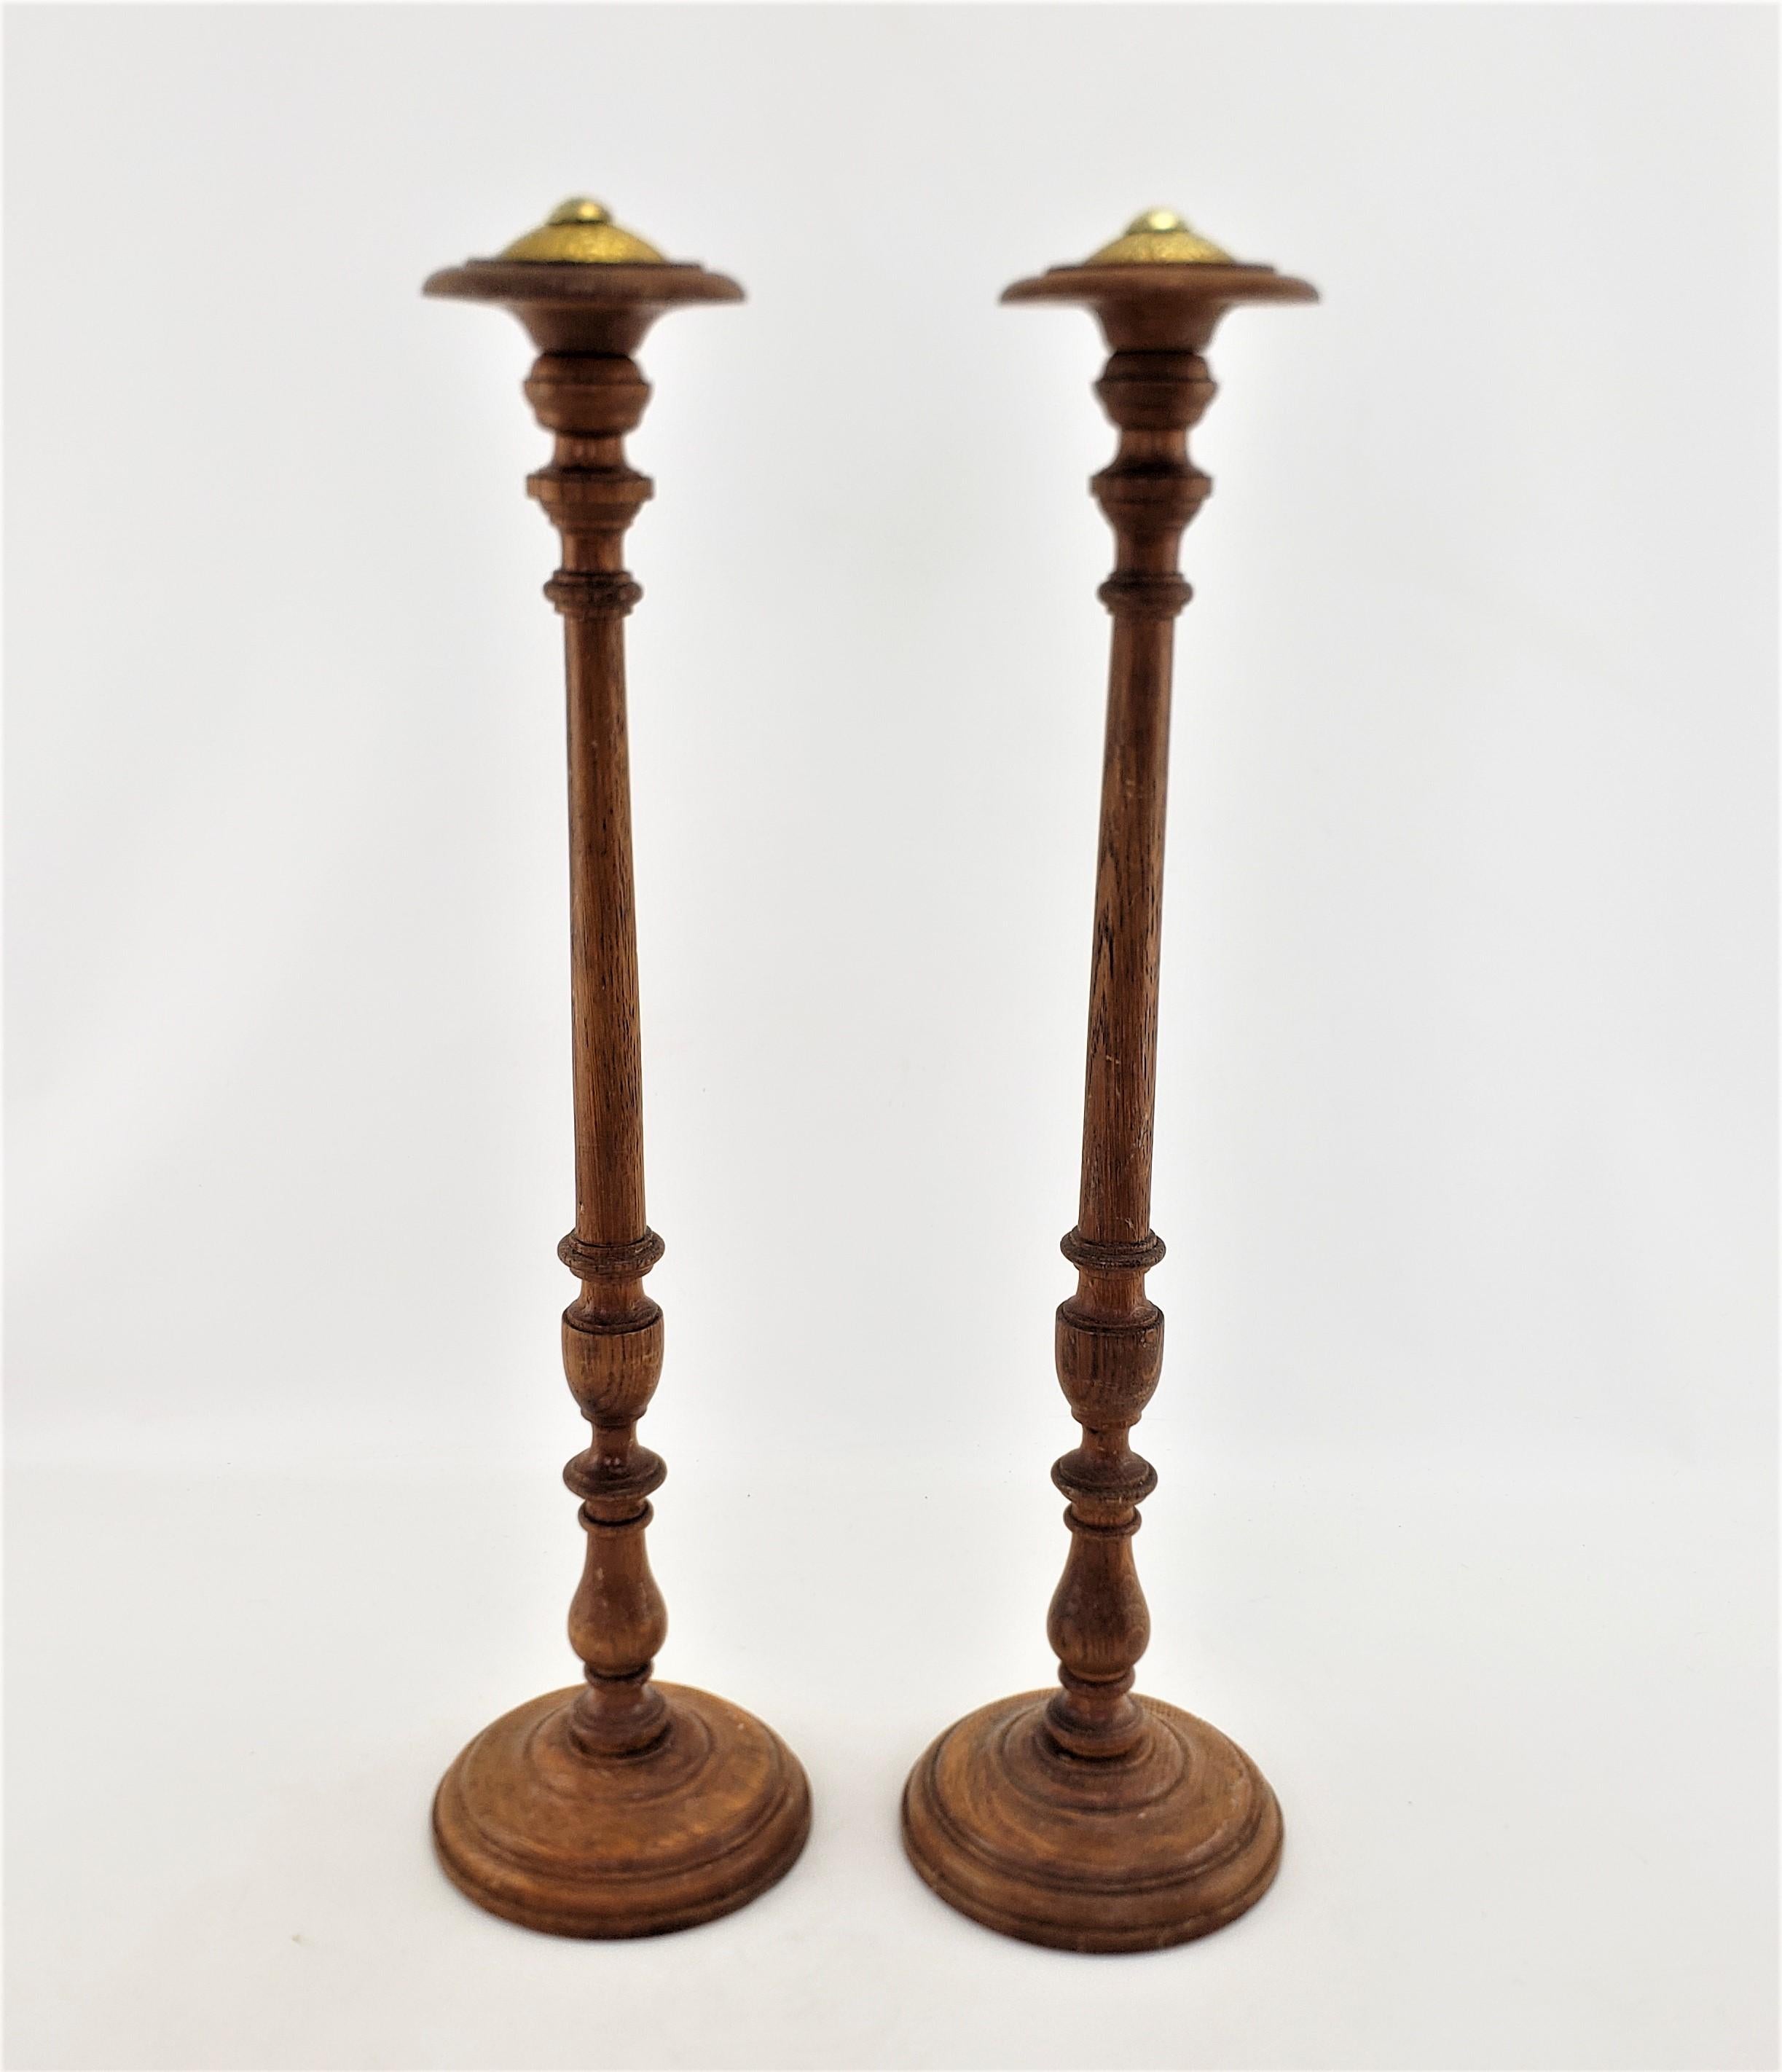 This pair of antique turned mercantile hat stands are unsigned but presumed to originate from England and date to approximately 1880 and done in a period Victorians style. The shafts and base are composed of solid oak with have been lath turned in